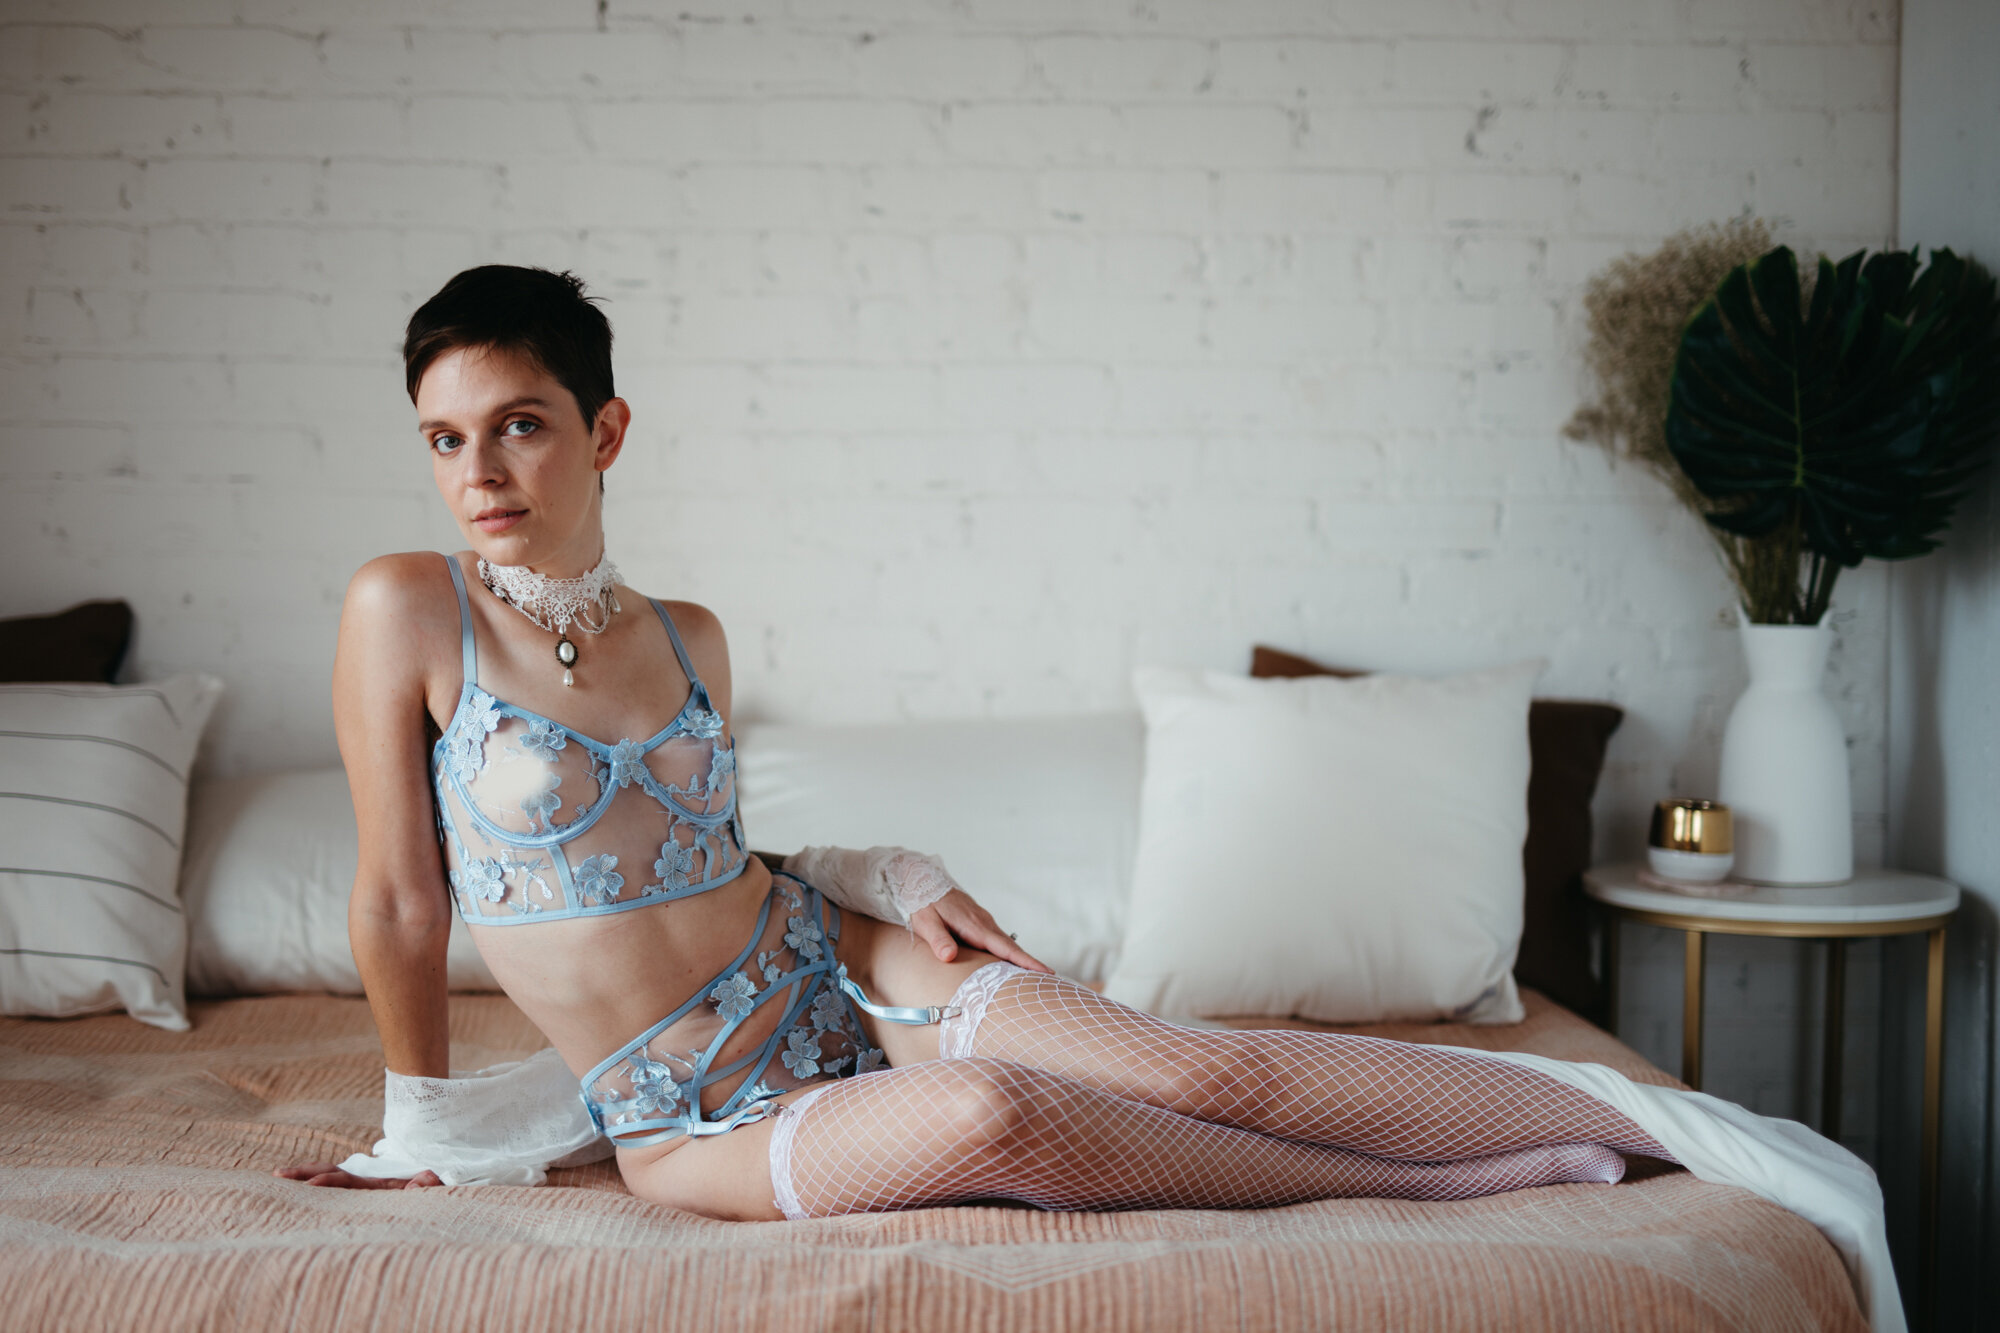 Genderqueer person wearing victorian style lingerie set laying sideways on a bed